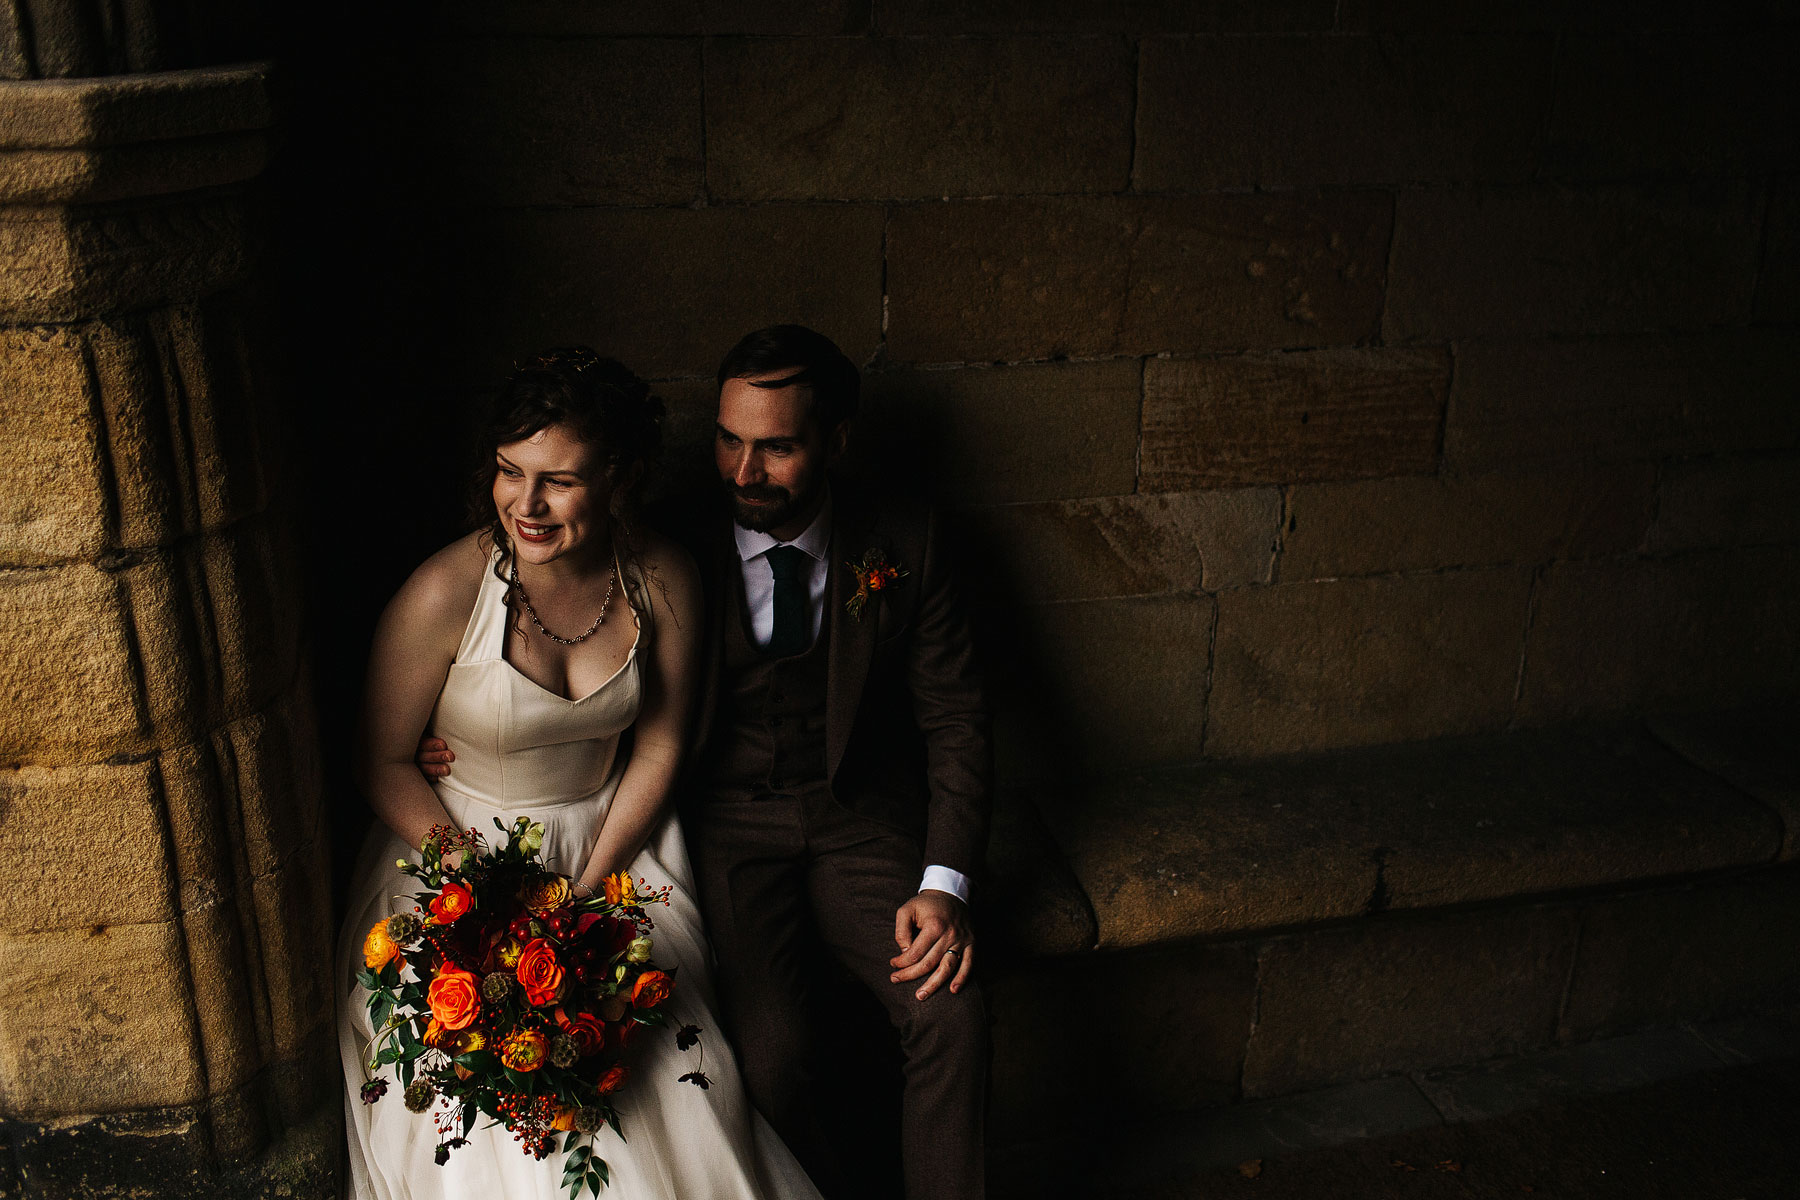 East Riddlesden Hall Wedding in Autumn by www.pauljosephphotography.co.uk 